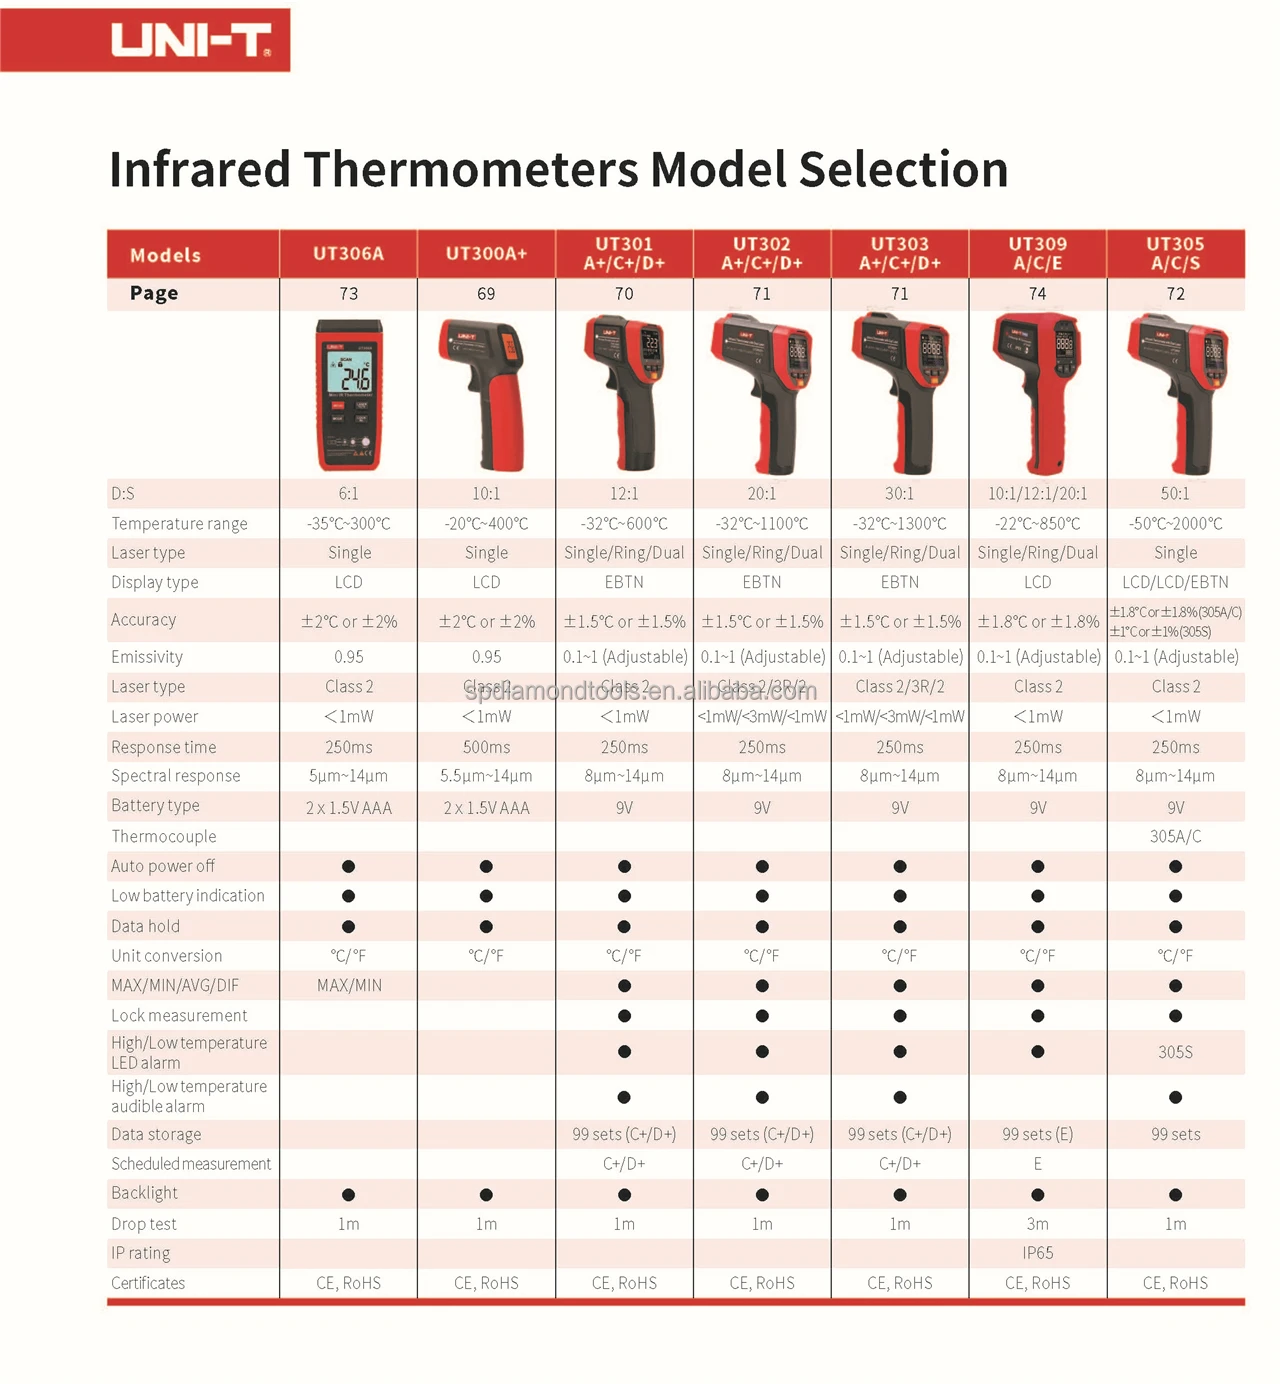 UNI-T UT301+ series UT301C+ High Low Temperature Thermometer cheapest price  with high accuracy